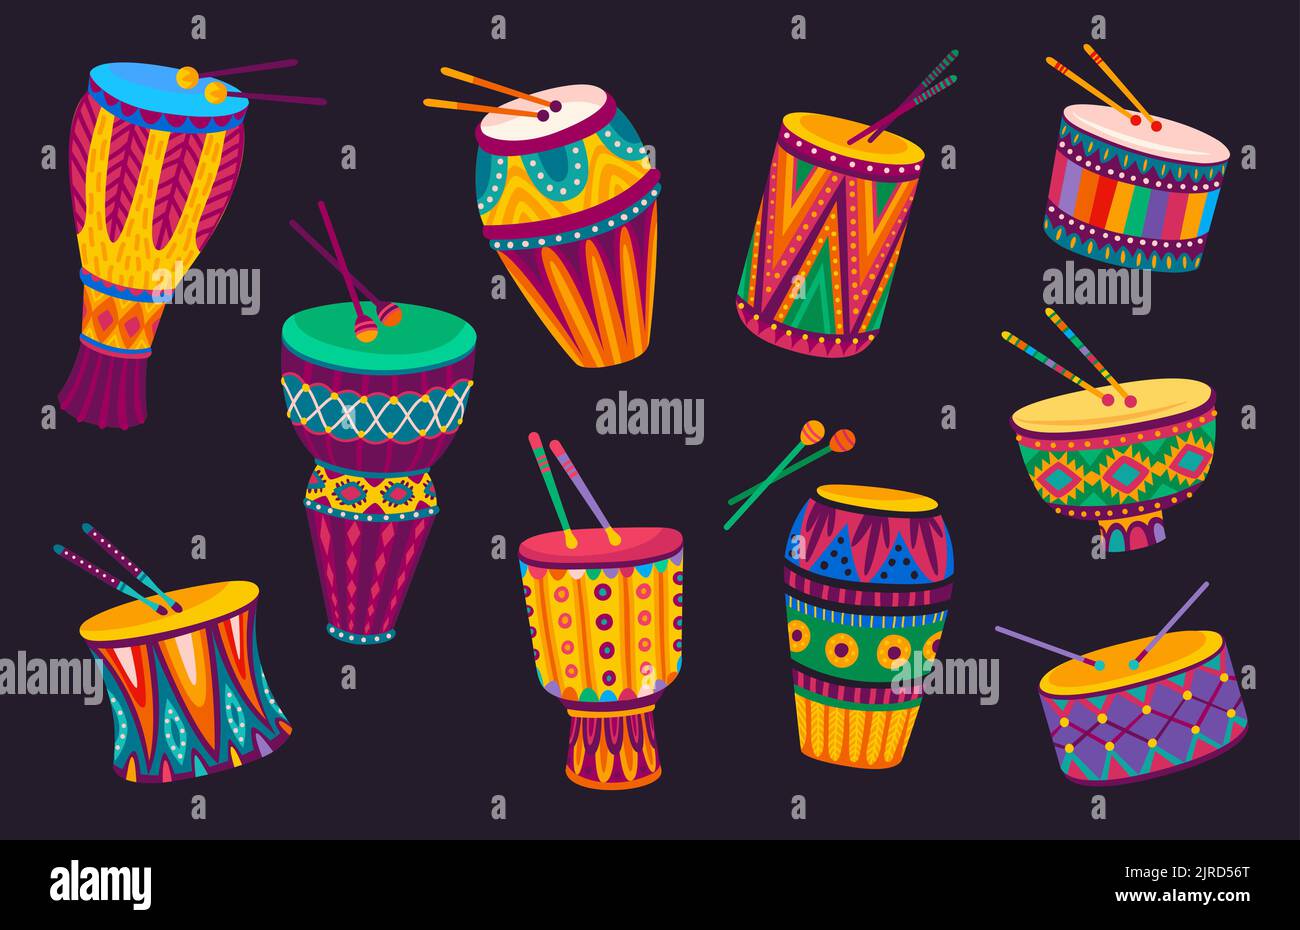 Brazilian and african drums, cartoon music instruments with traditional ornament. Vector Africa or Brazil ethnic or Latin folk percussion drums with drumsticks, carnival band djembe or cuica drums Stock Vector